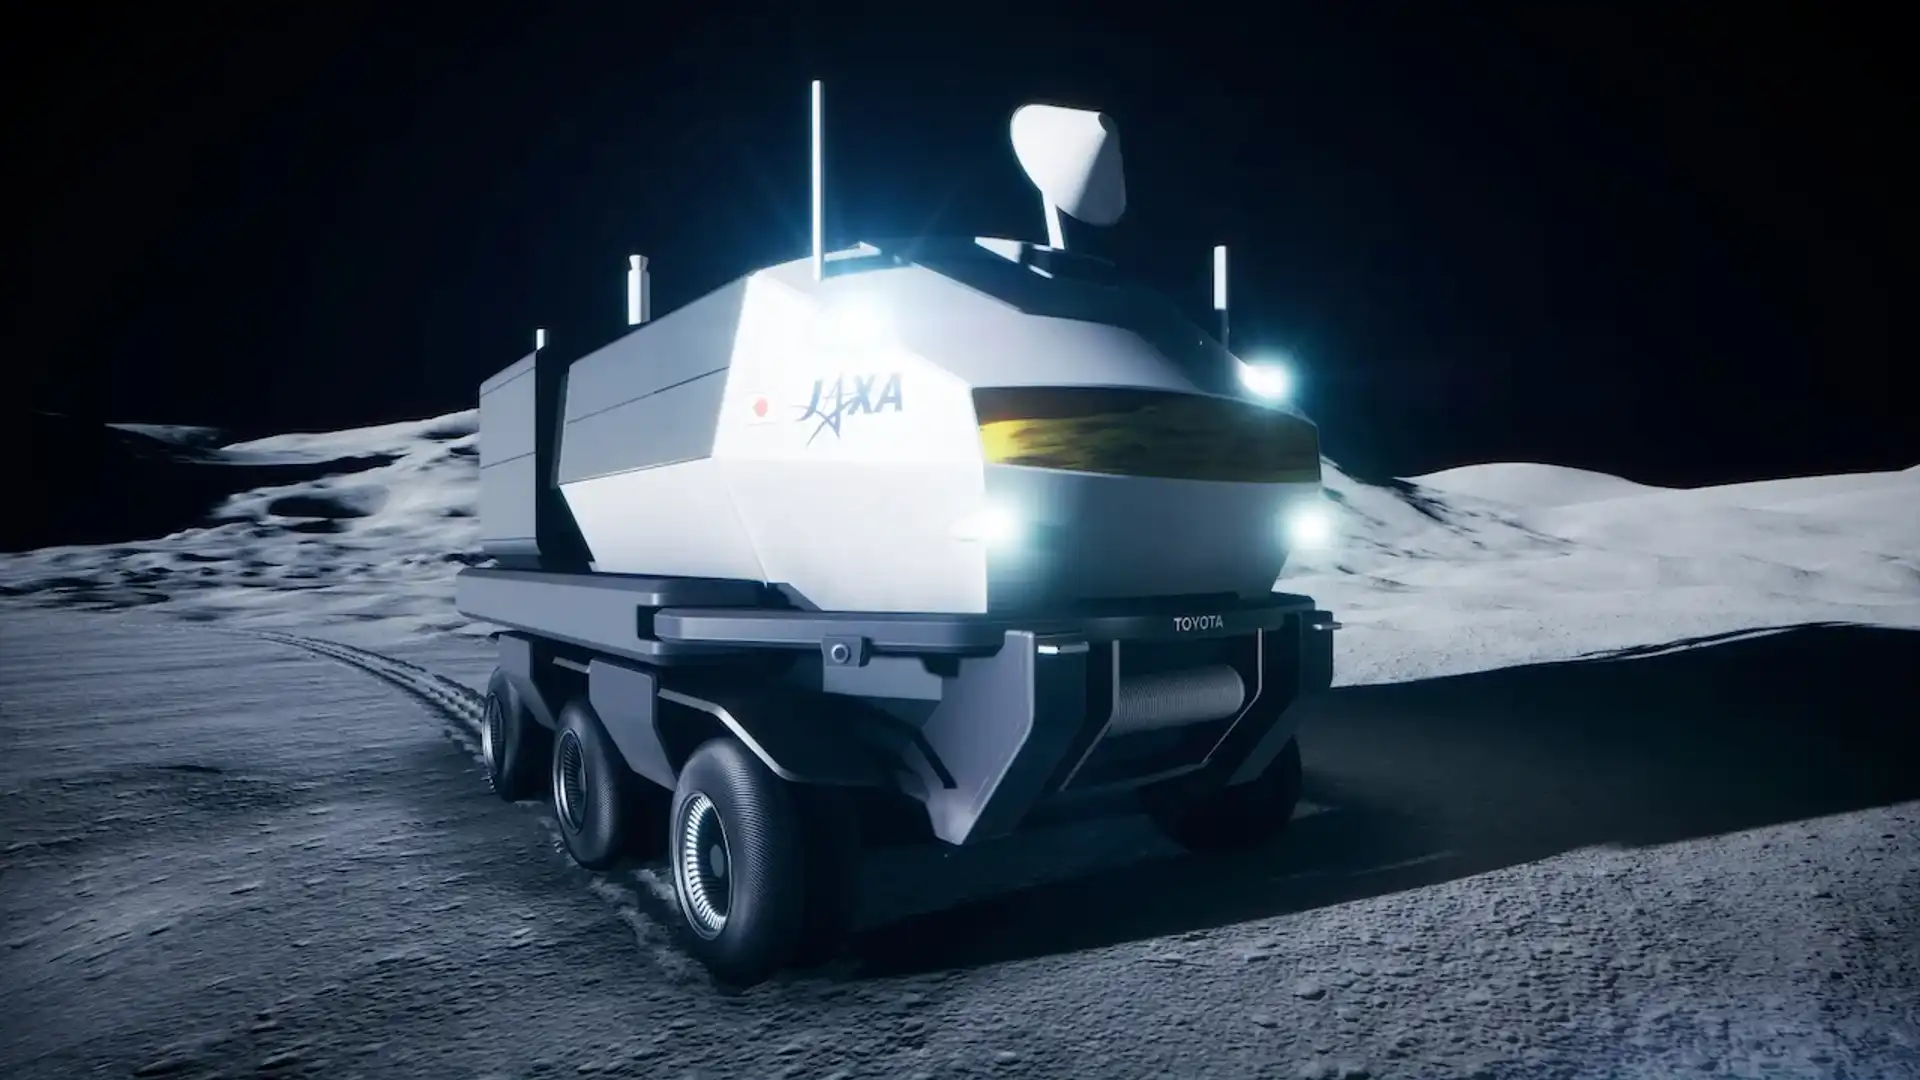 NASA mission will drive a Toyota Lunar Cruiser on the Moon